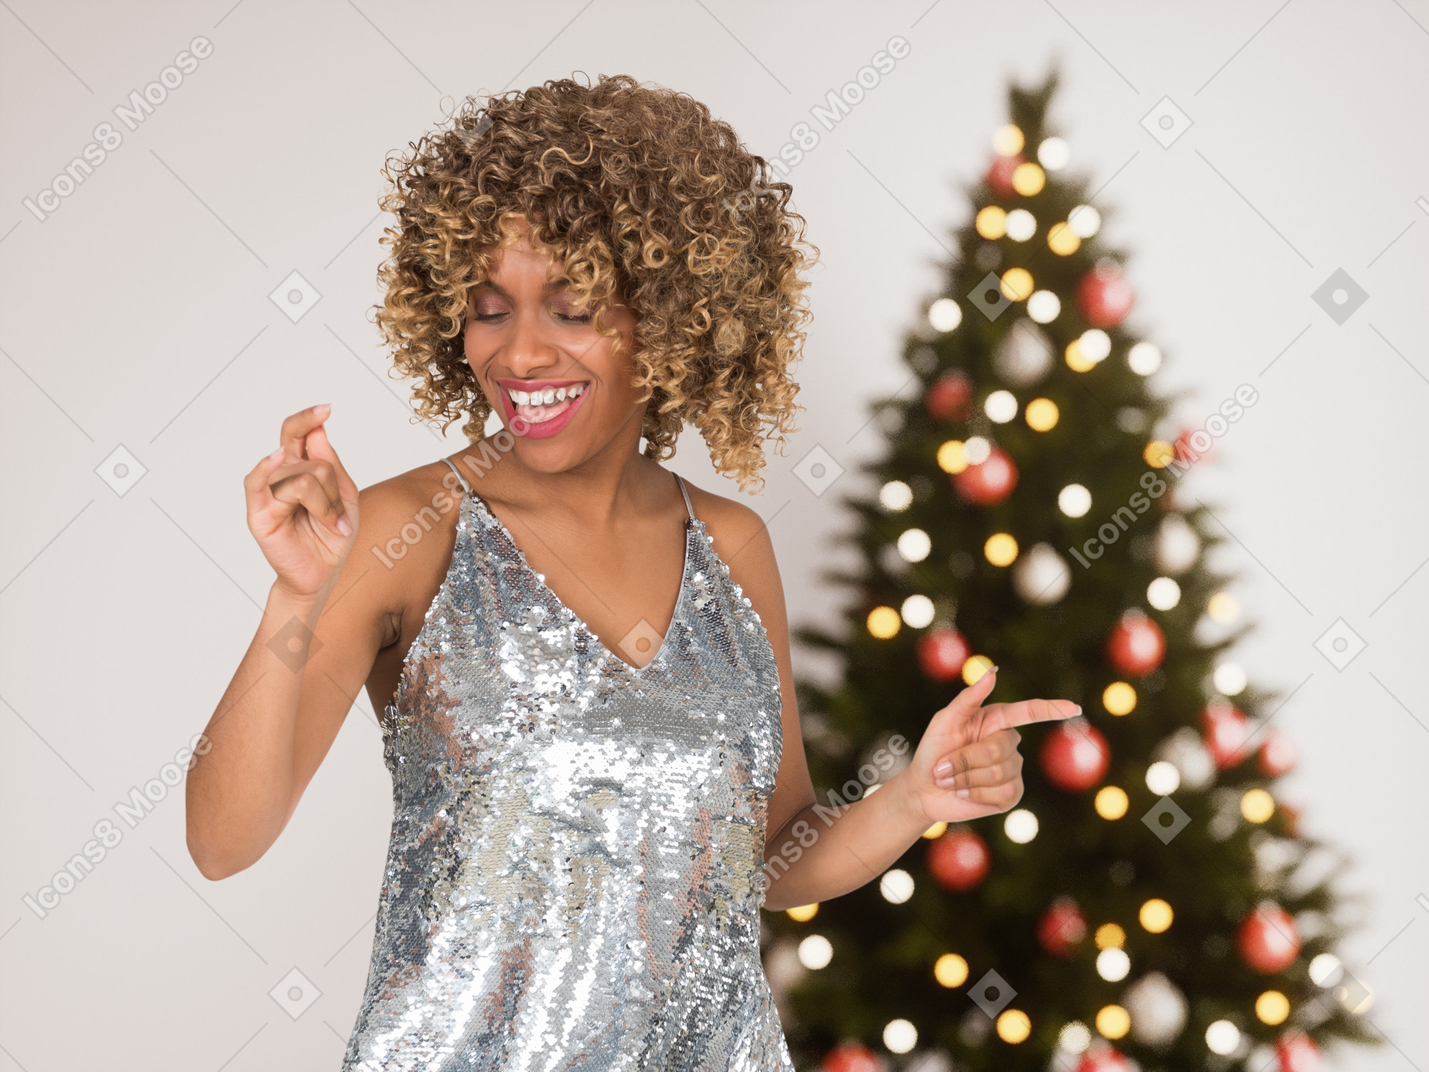 A woman in a silver dress standing in front of a christmas tree